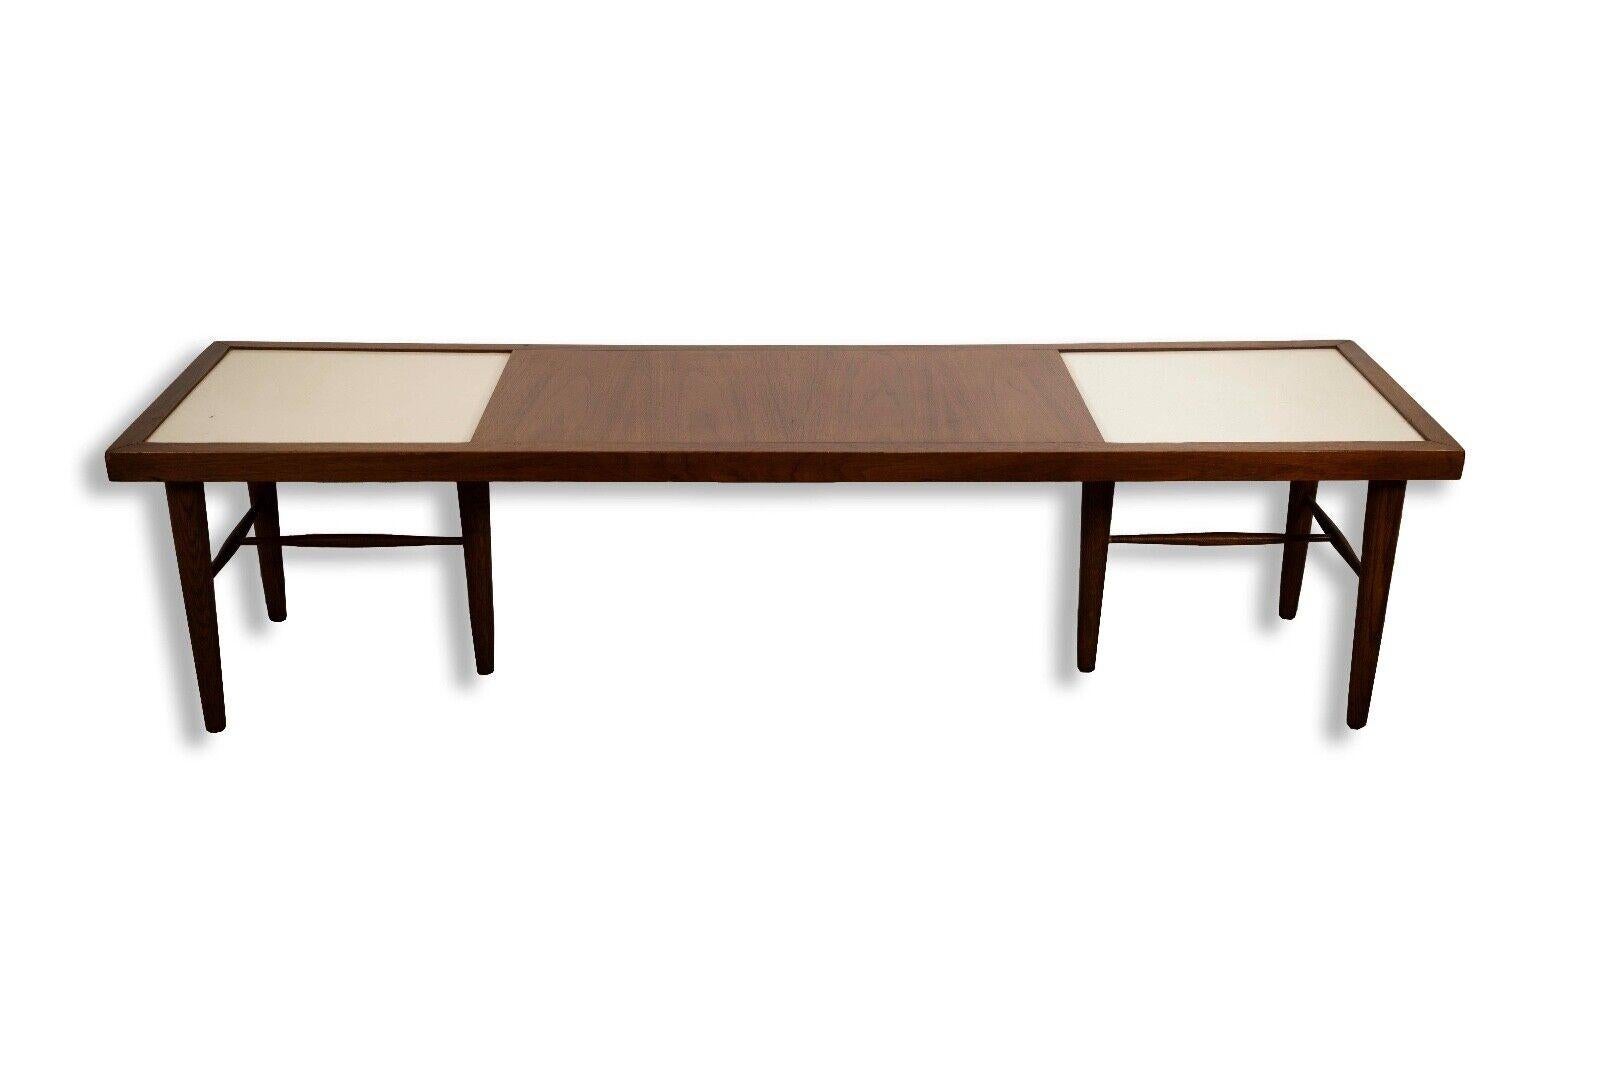 The Merton Gershun for American of Martinsville Coffee Table in Walnut is a quintessential piece of mid-century modern design. Crafted with the finest walnut wood, this coffee table exudes timeless elegance and sophistication. Its sleek lines,